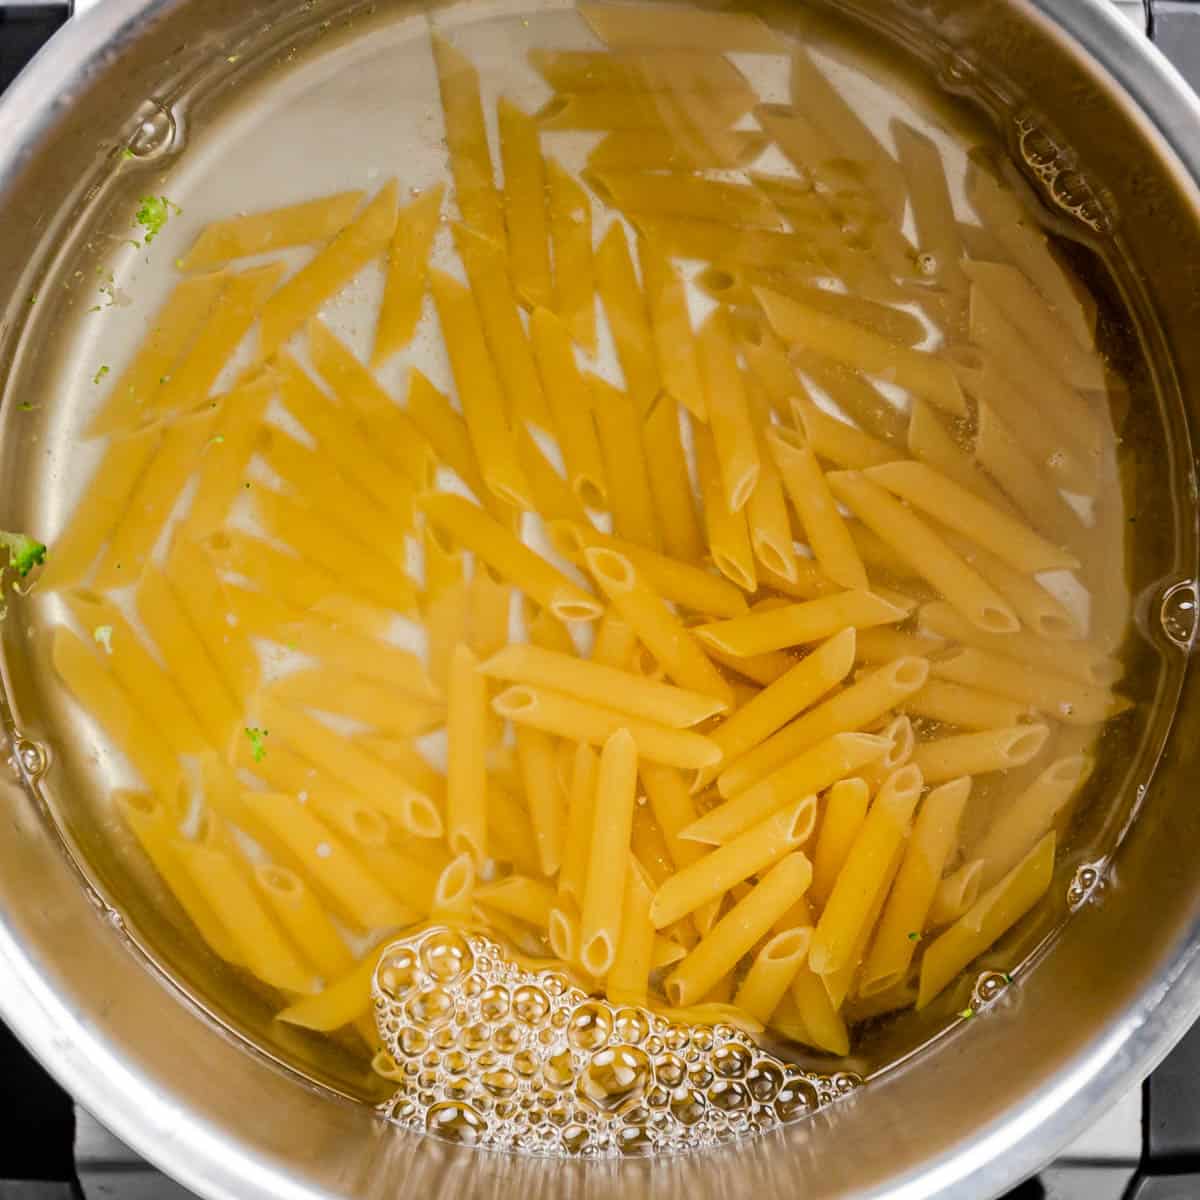 boiling the pasta.